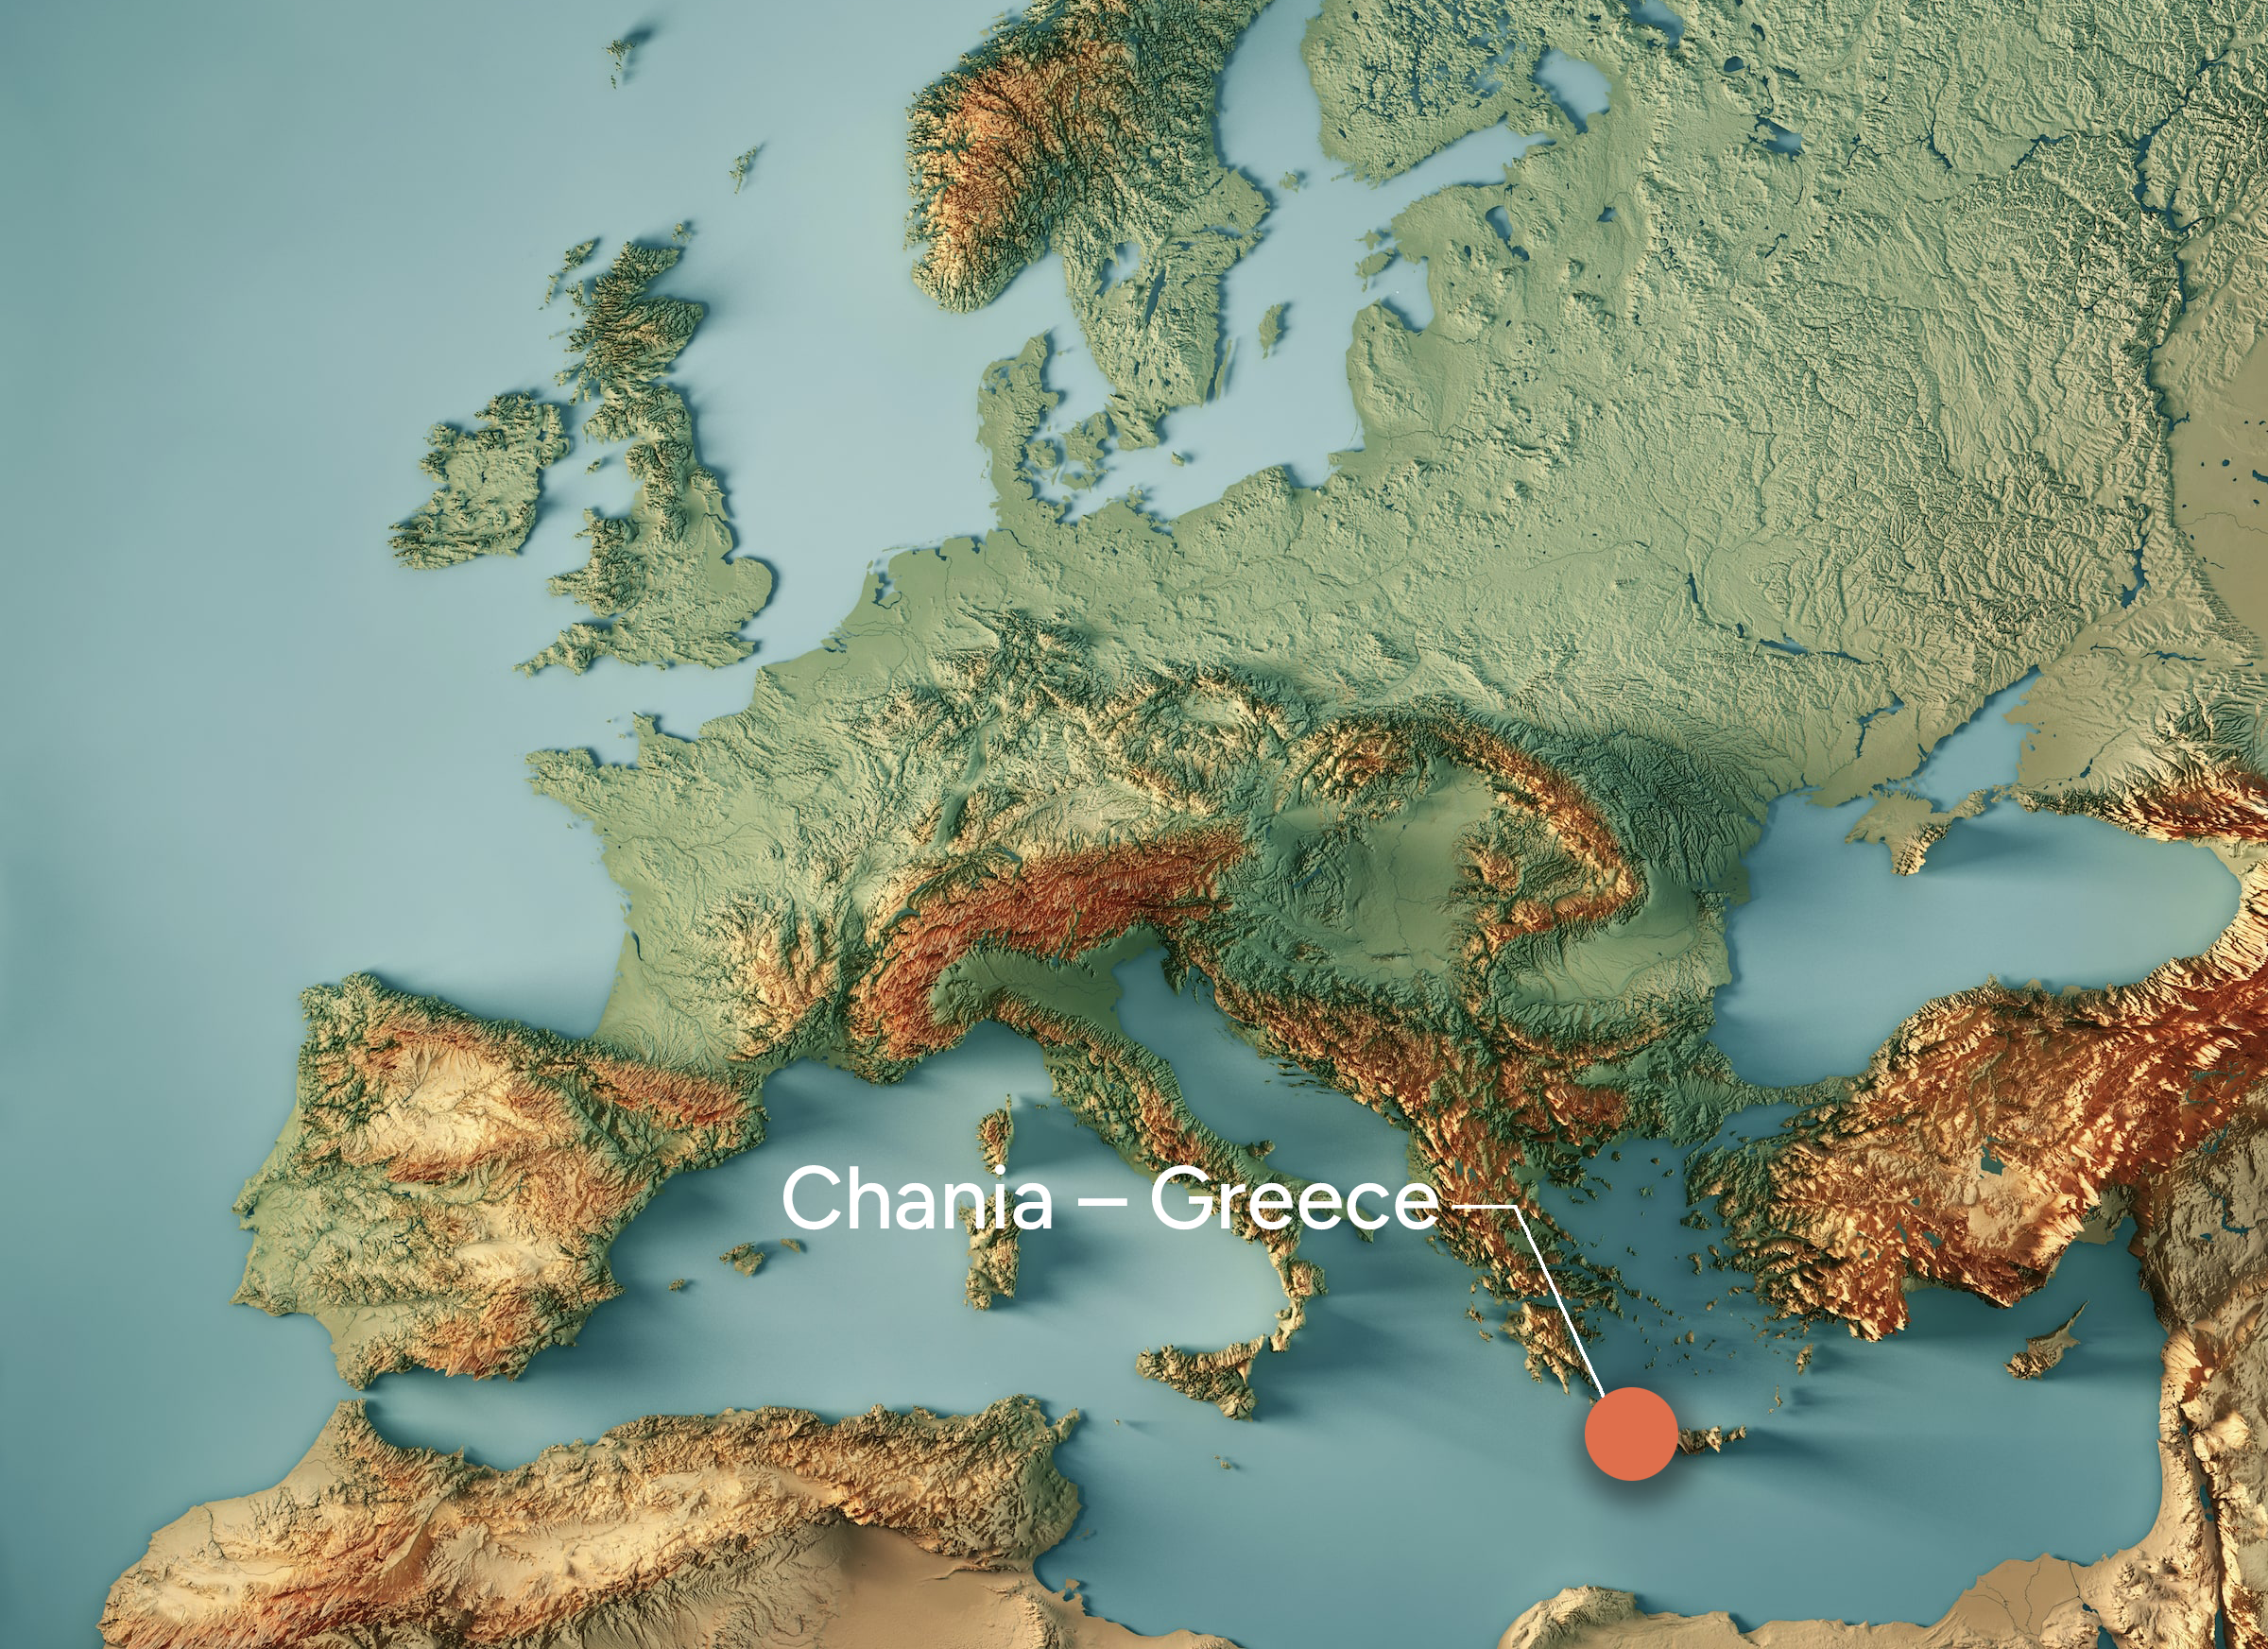 Topography map of Europe highlighting Chania, Greece